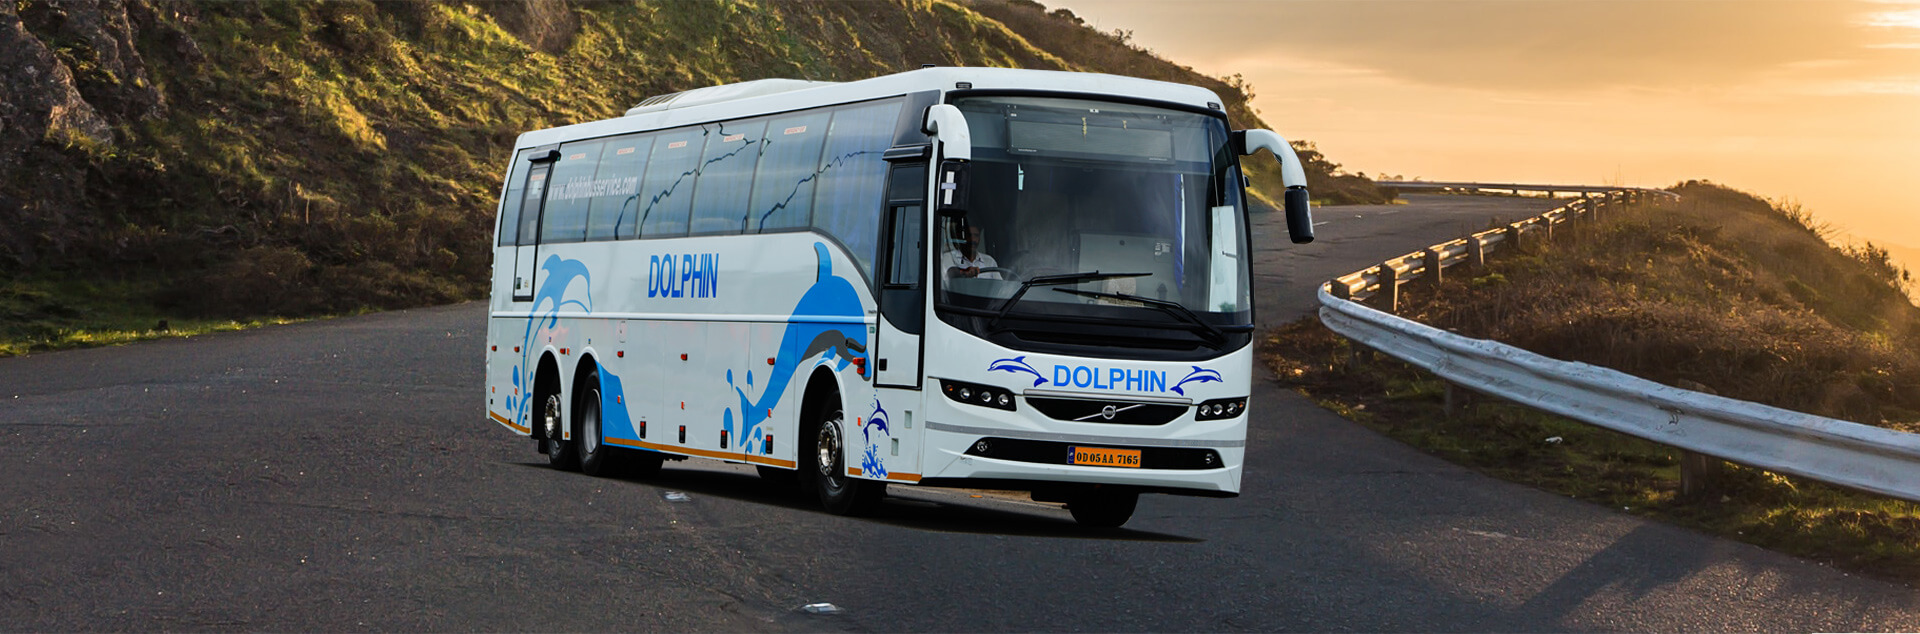 Online Bus Ticket Booking Dolphin Bus Service